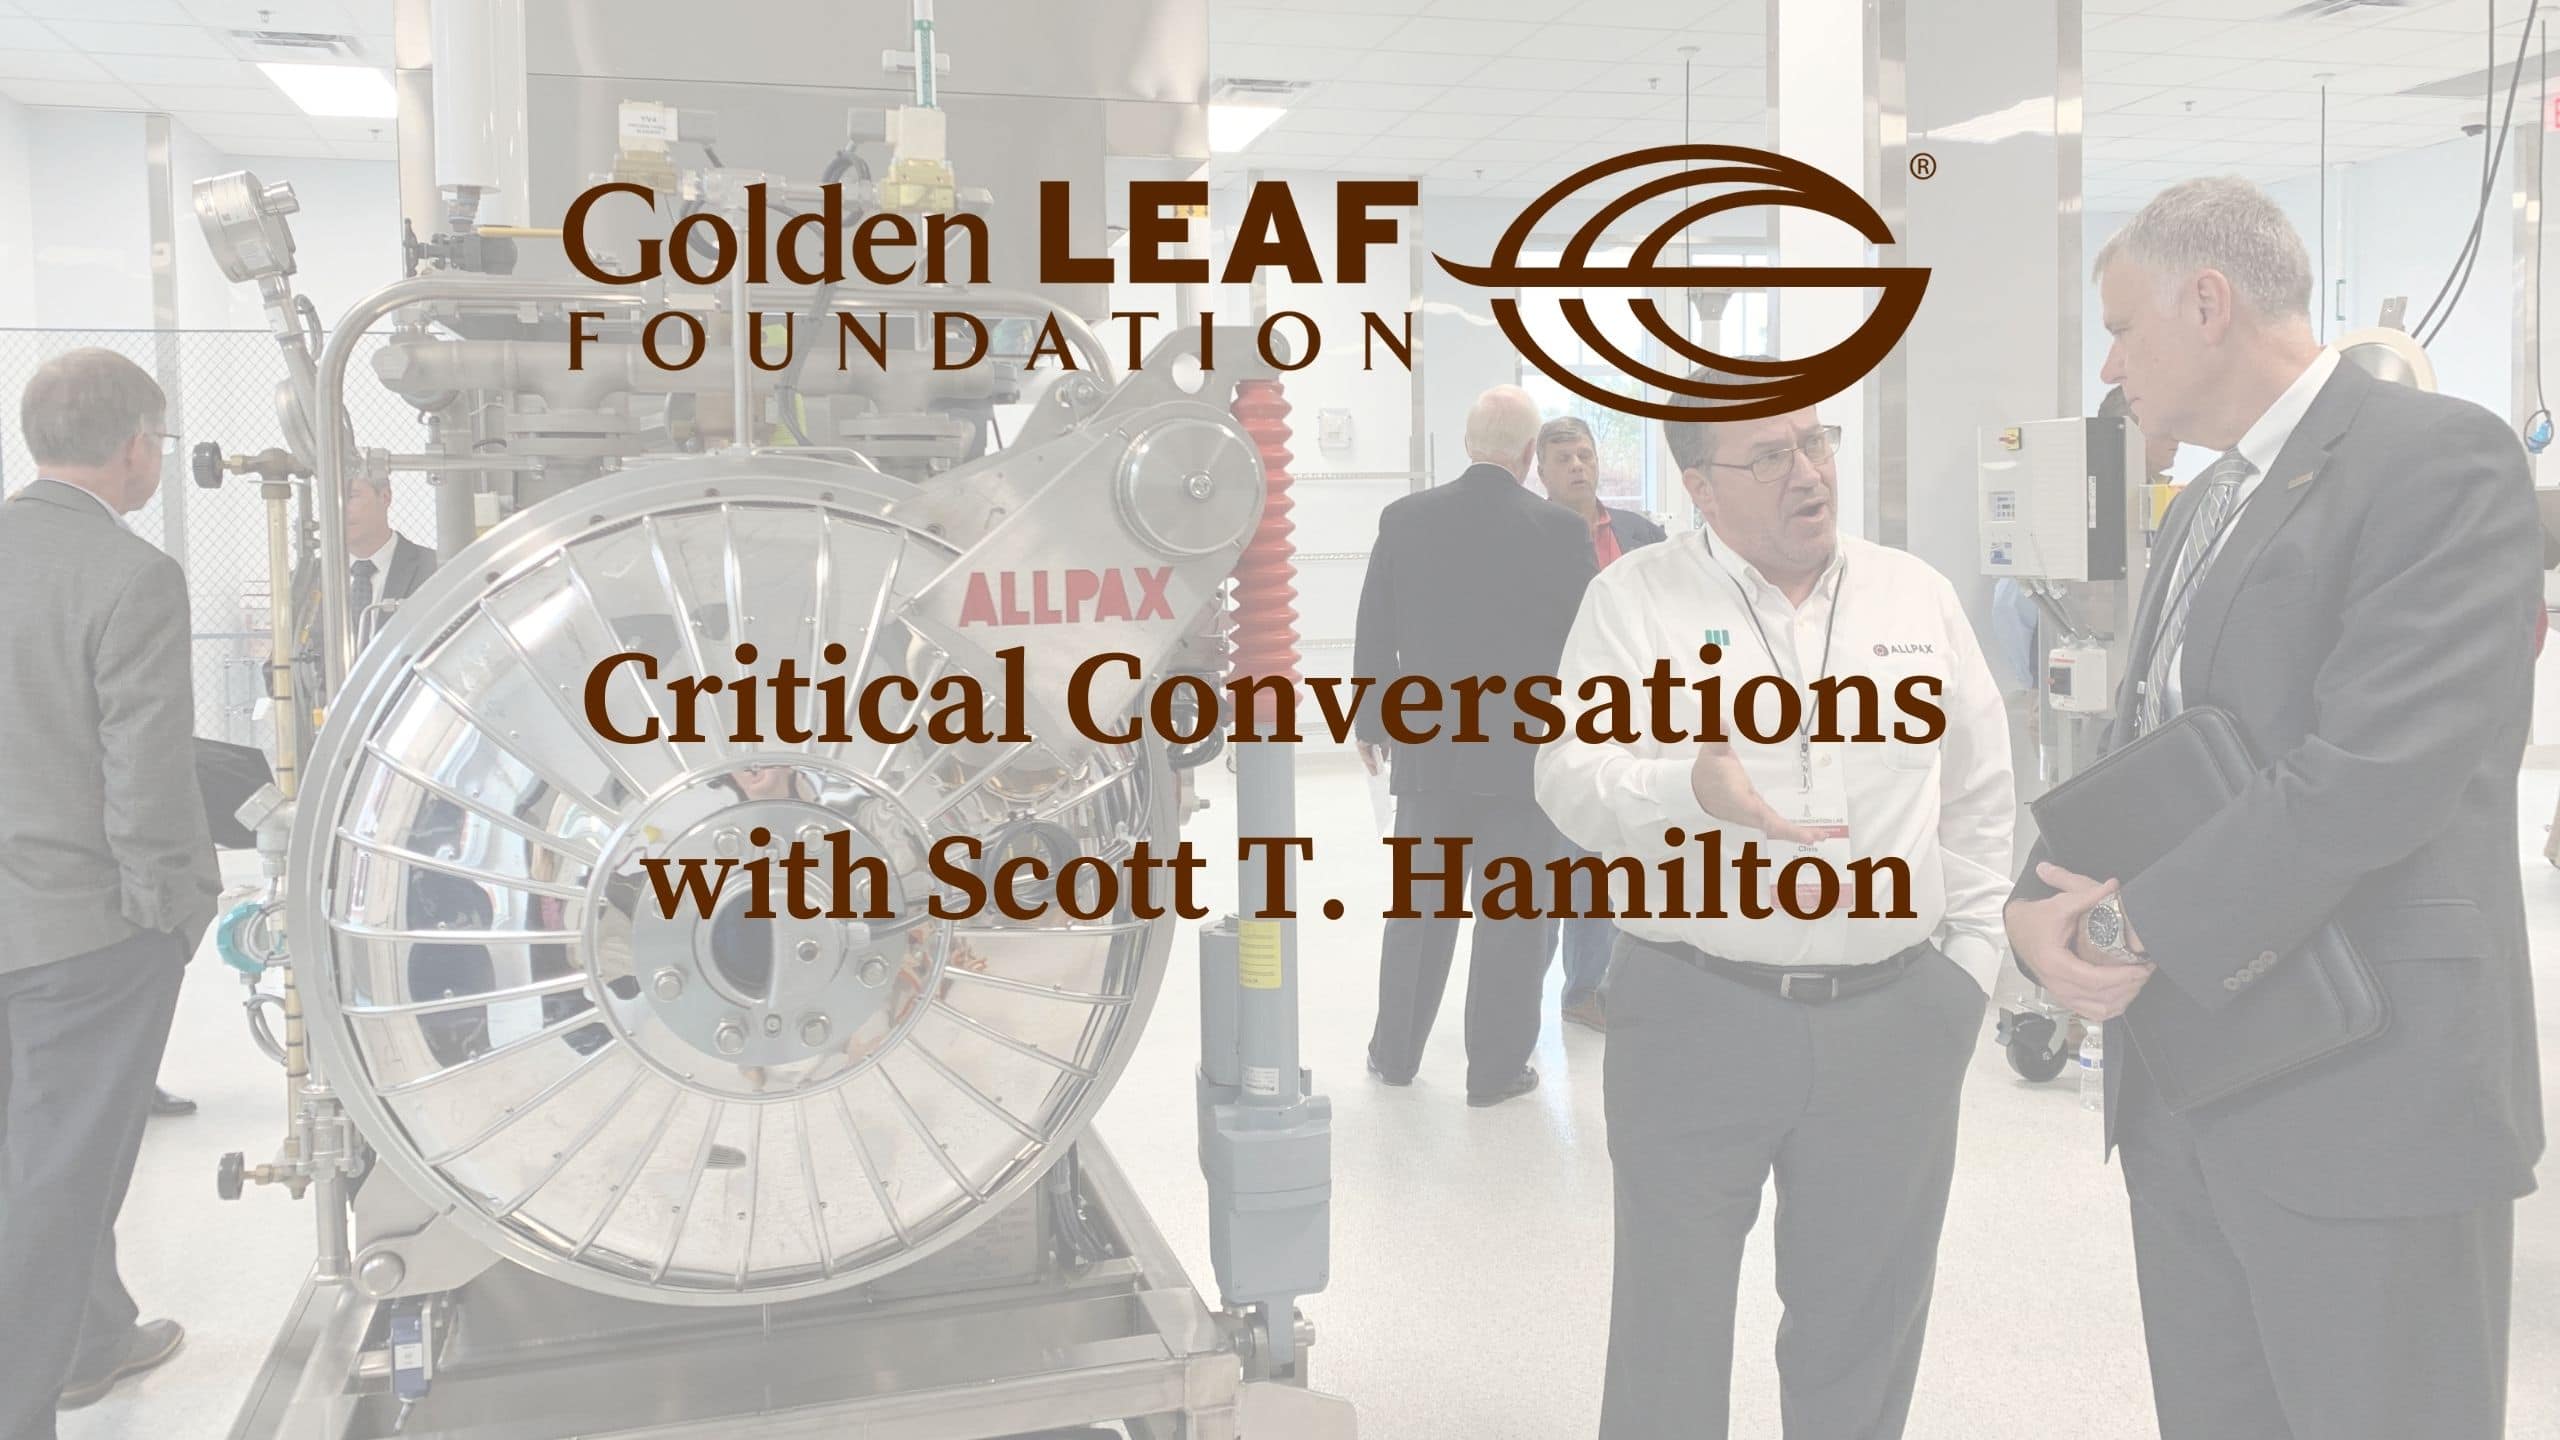 Critical Conversations with Scott T. Hamilton featuring Gary Salamido, President and Chief Executive Officer of the NC Chamber